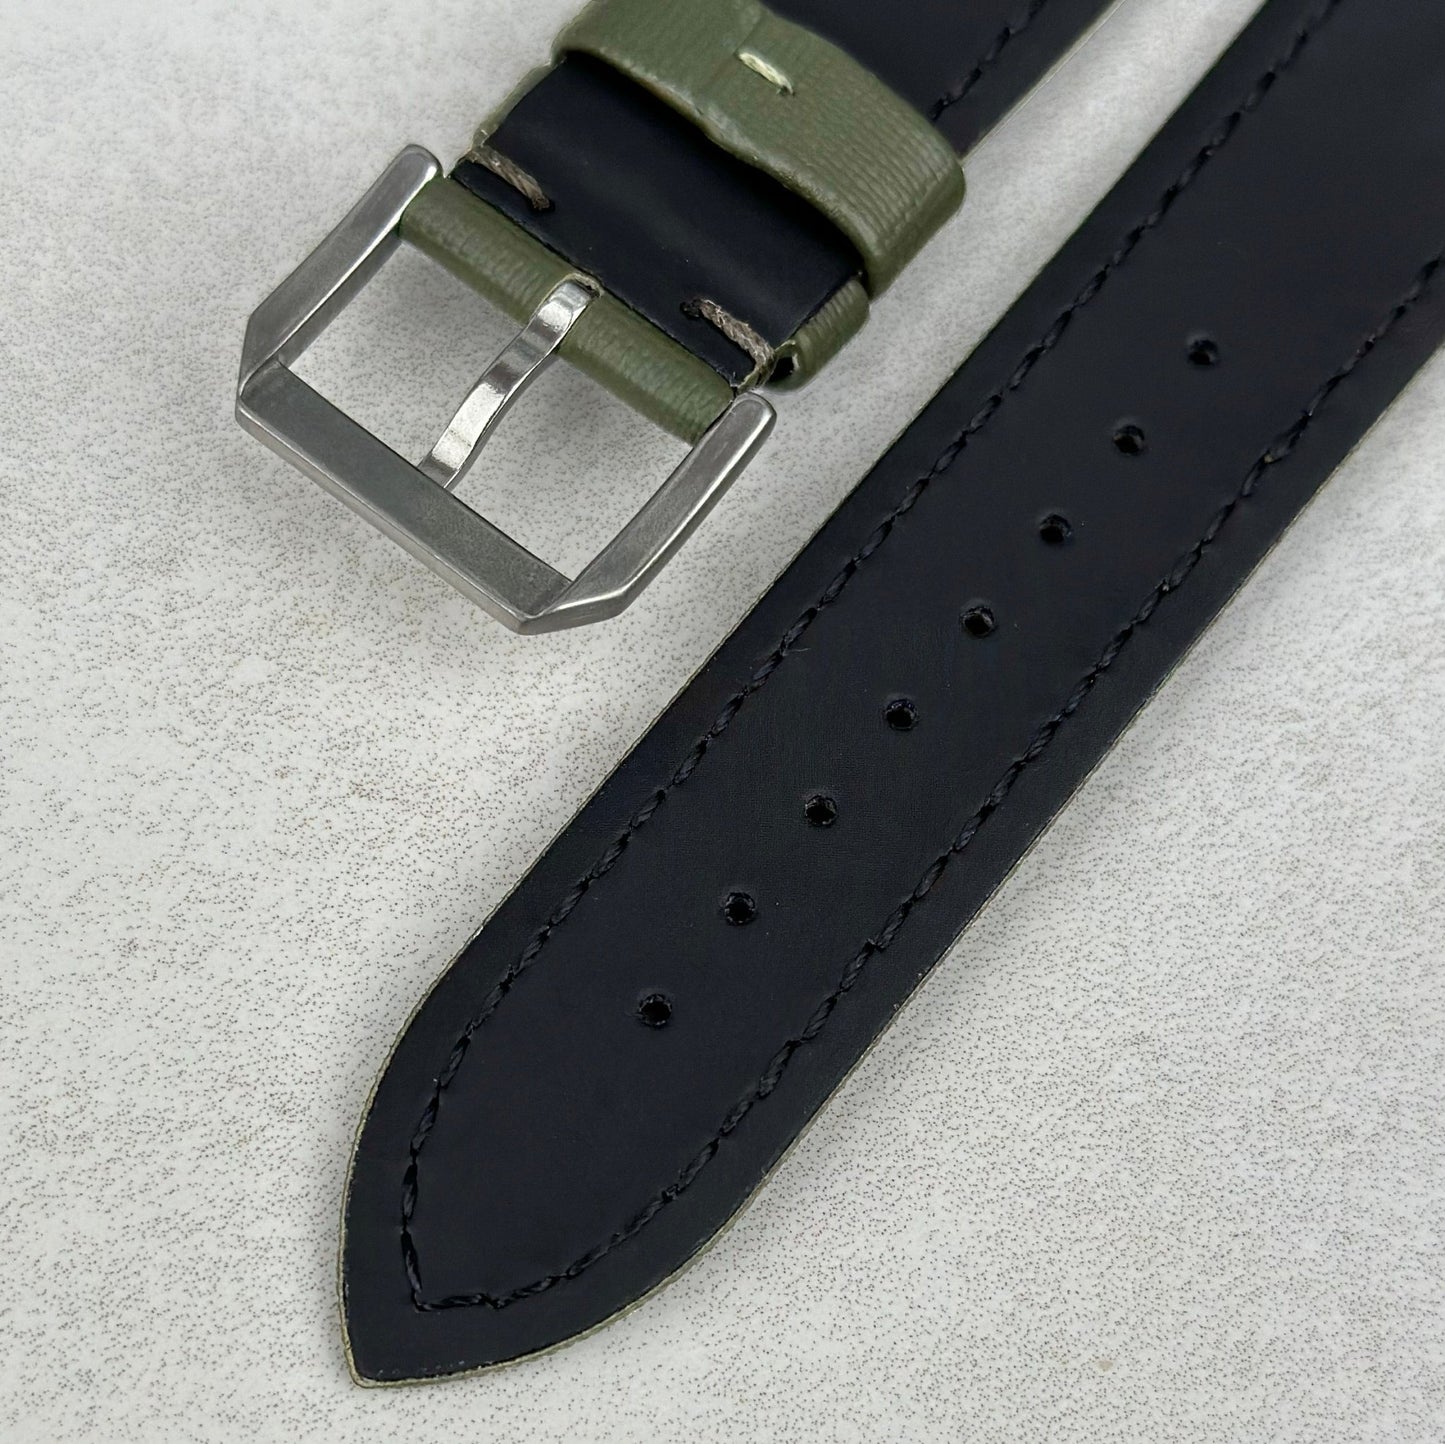 Underside of the buckle on the Bermuda sail cloth watch strap. Watch And Strap